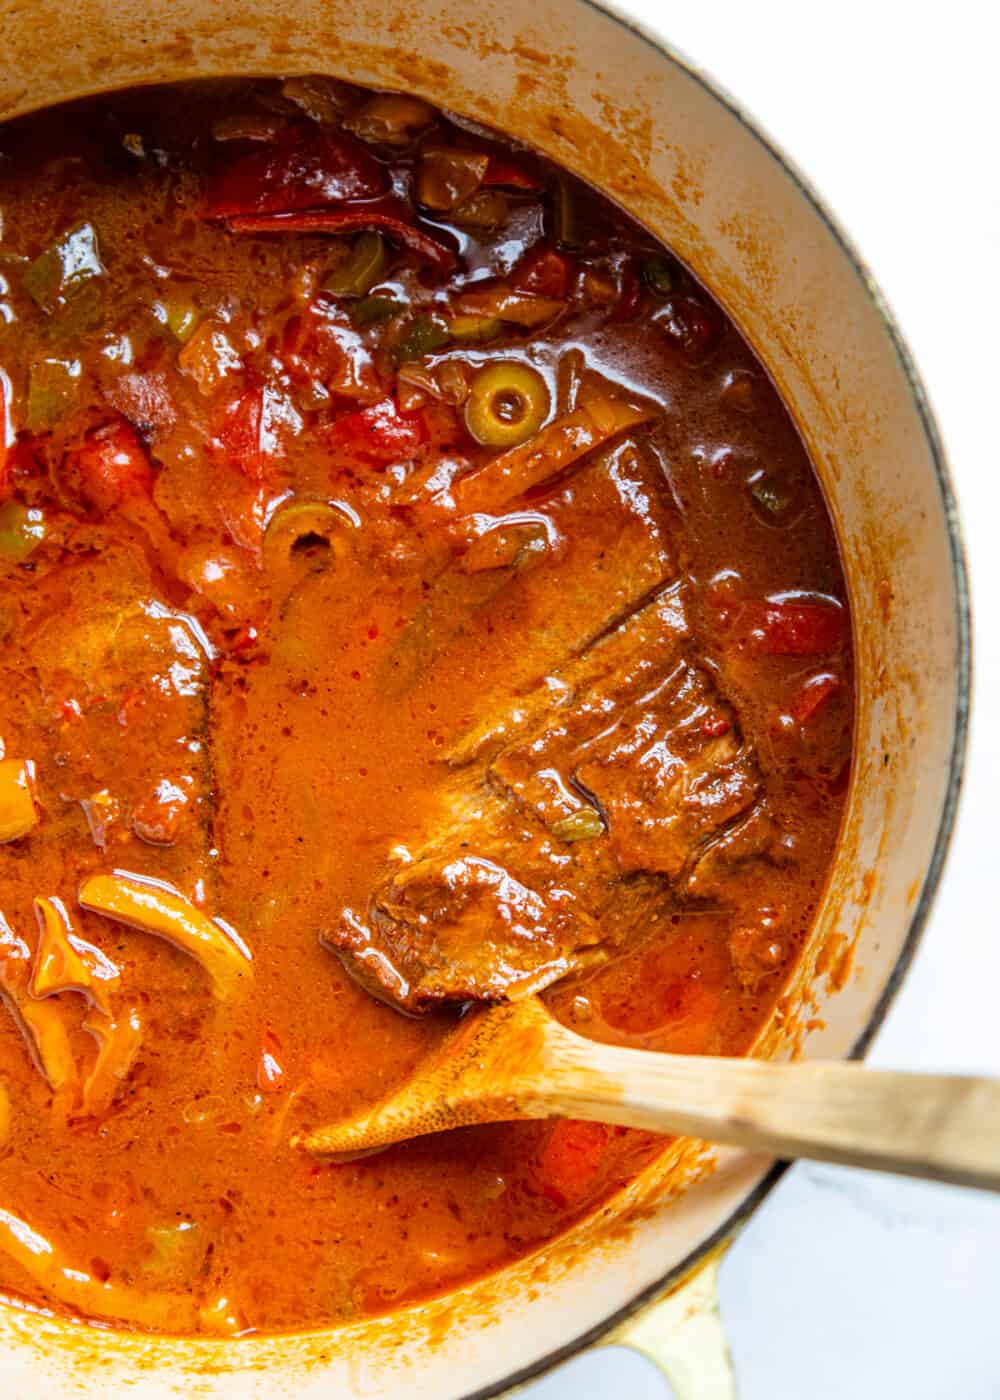 cooke ropa vieja in large pot